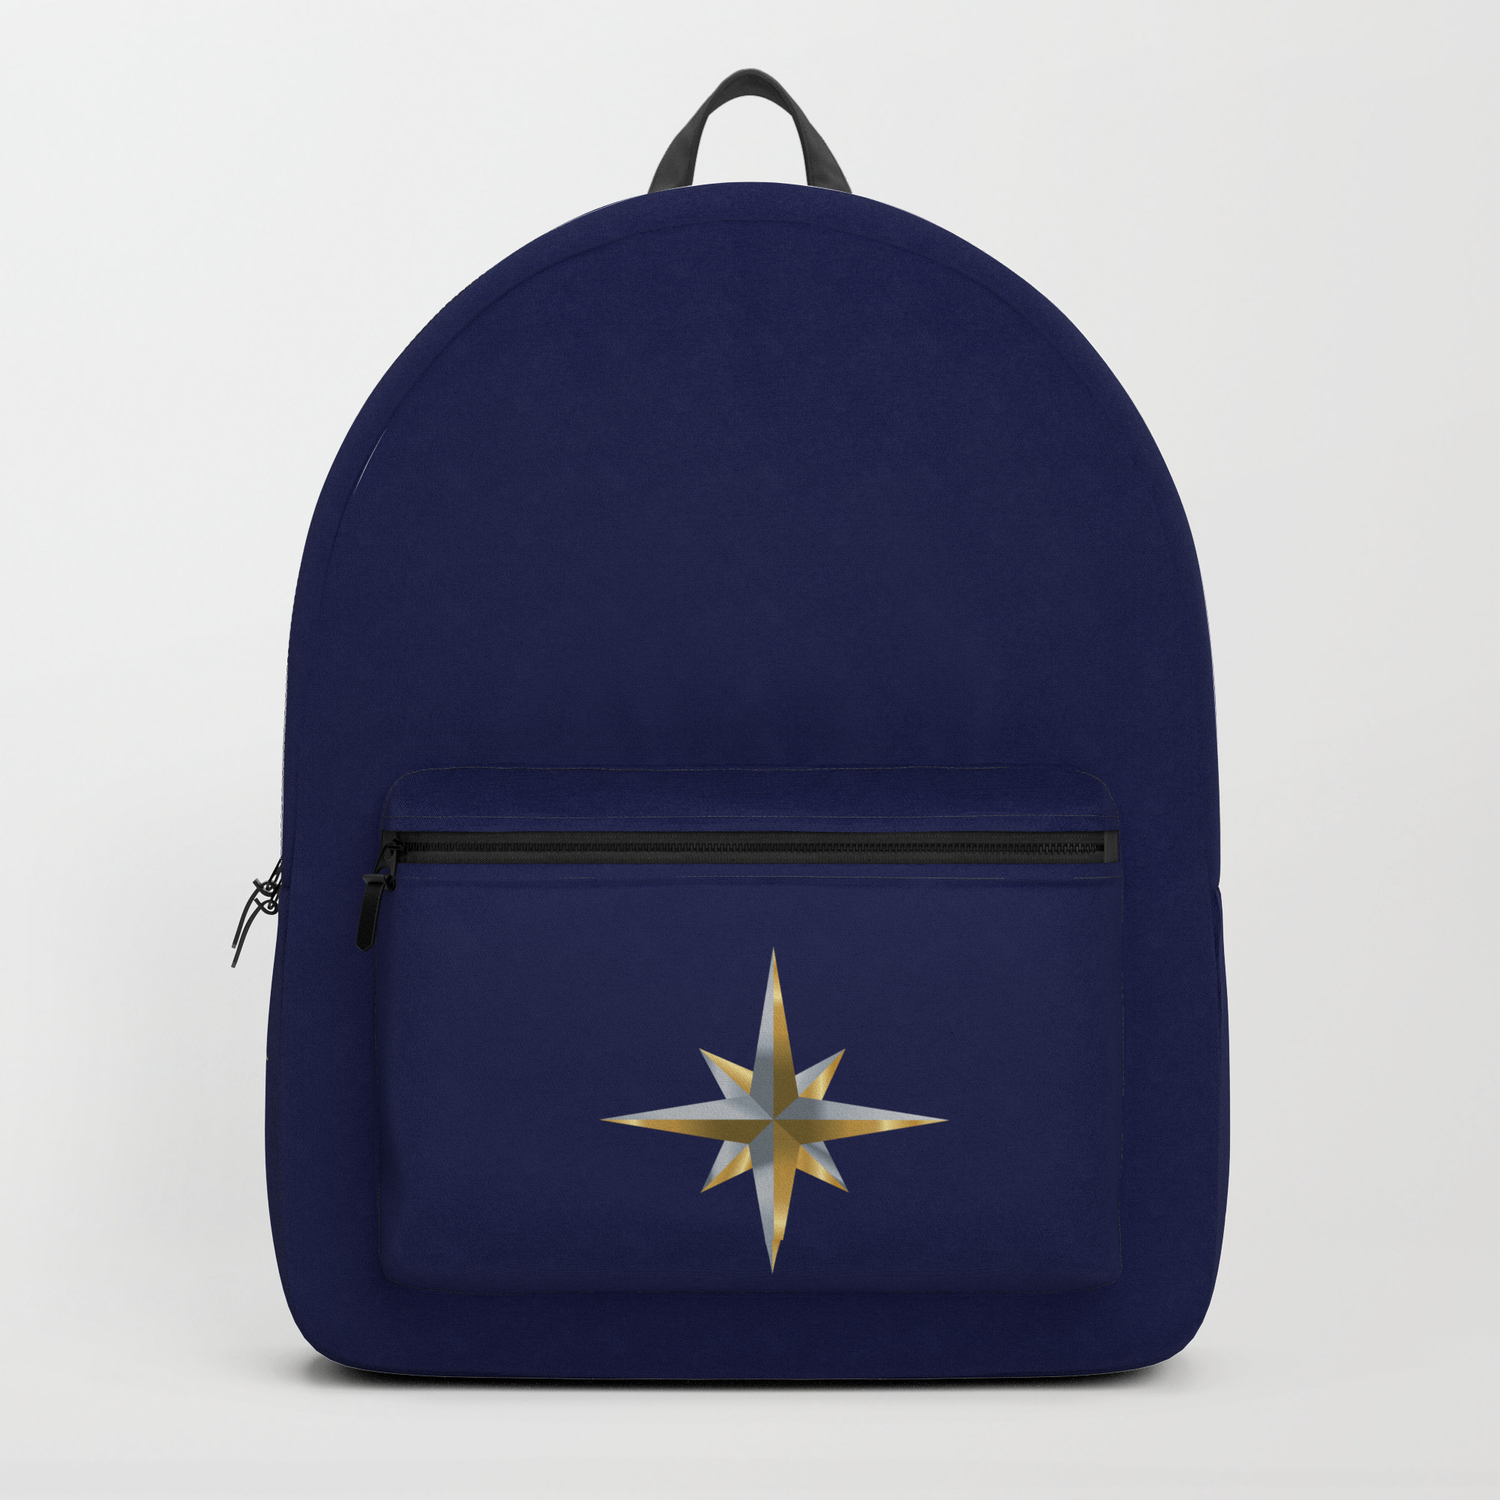 north star backpack